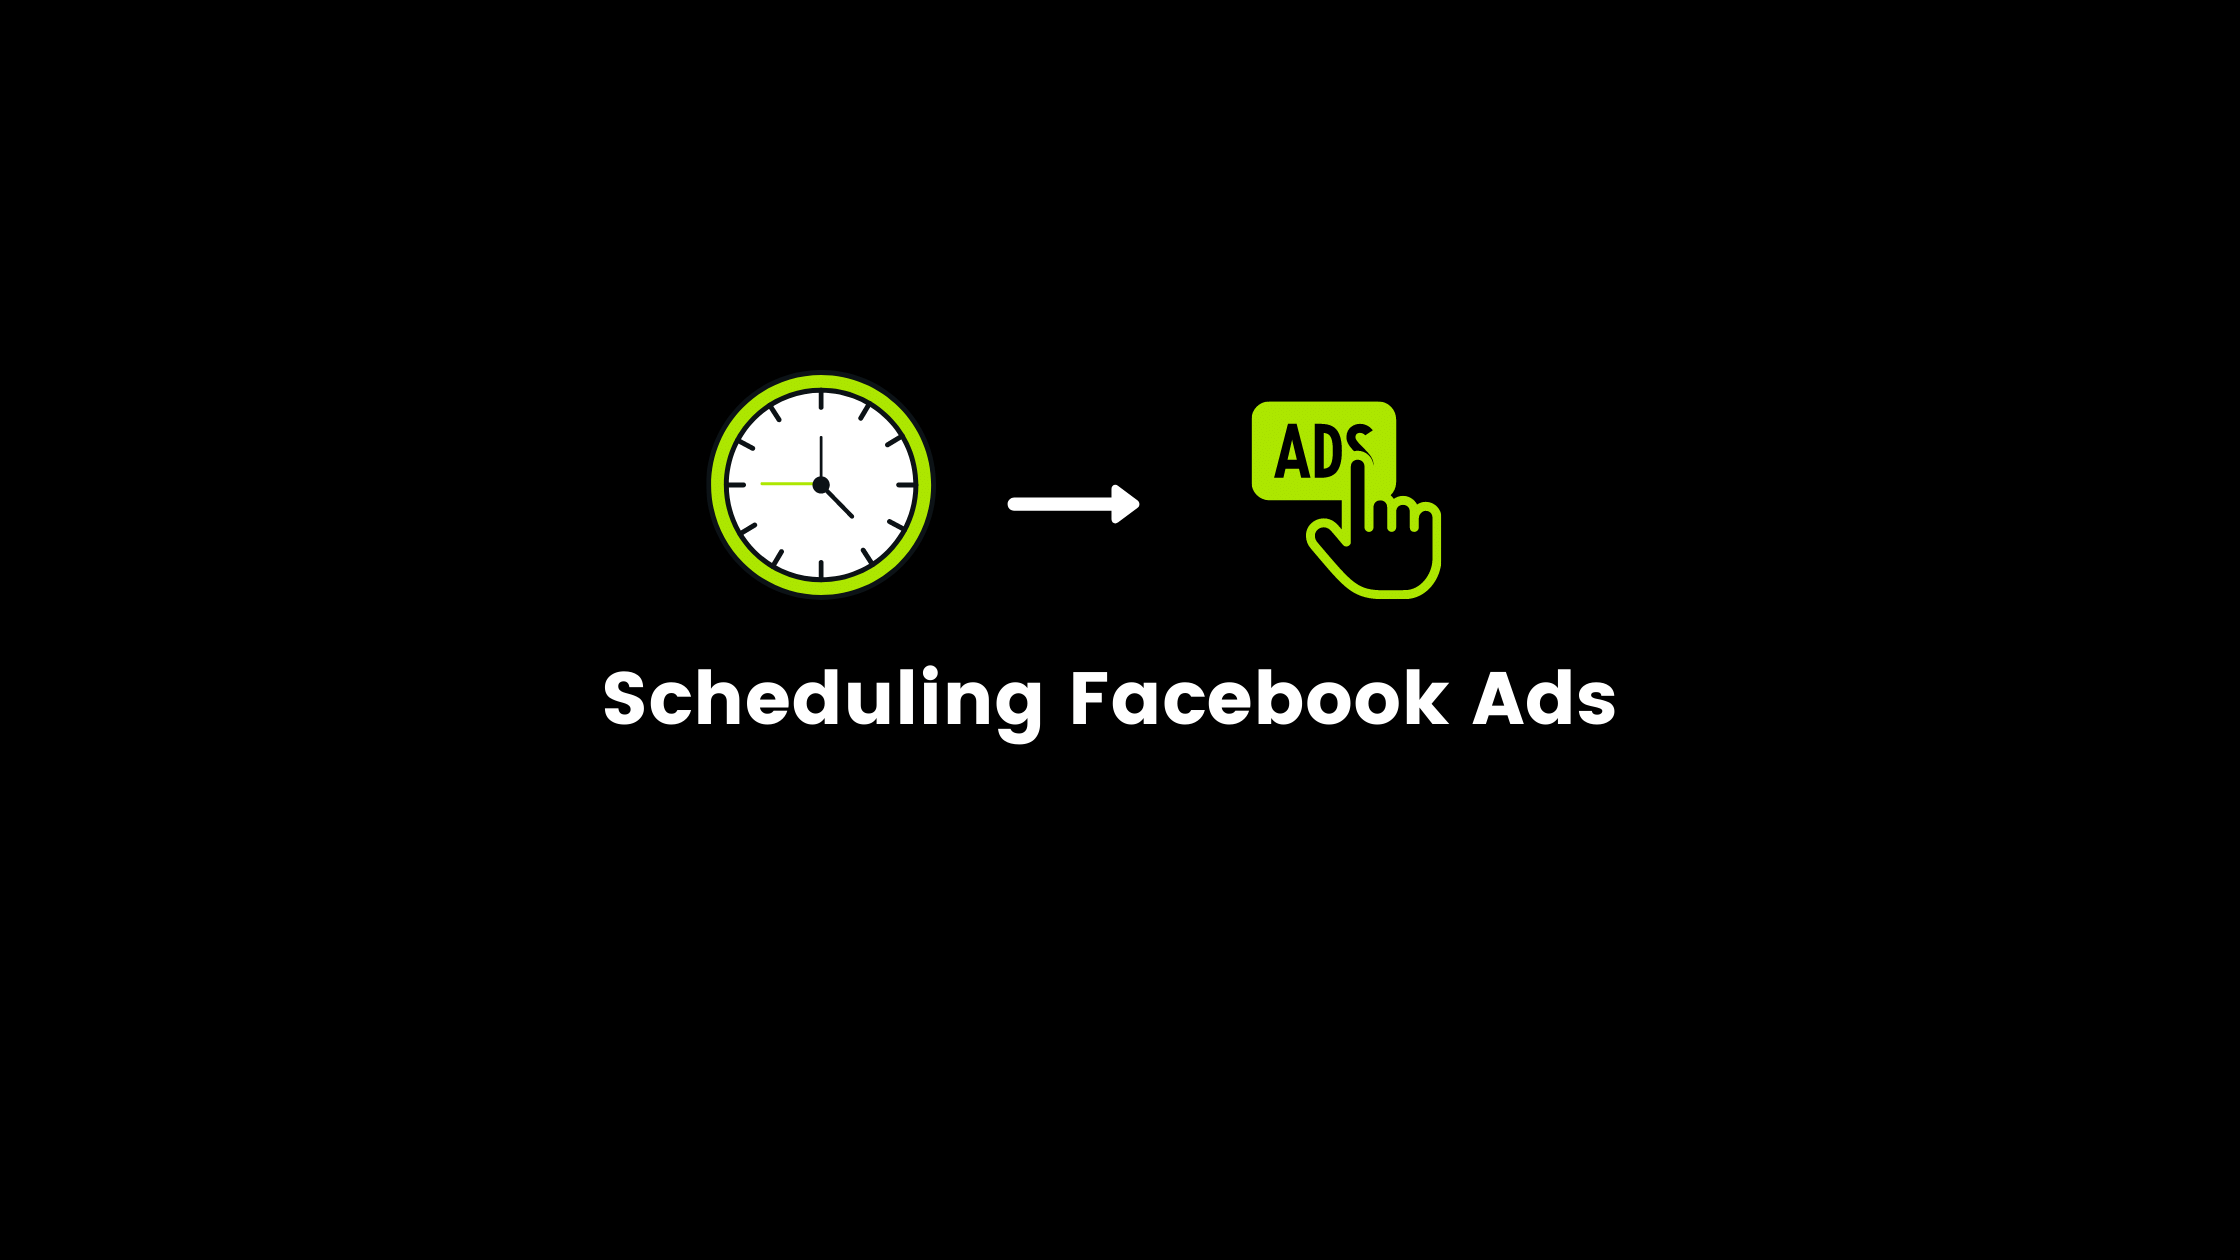 How to schedule Facebook Ads?